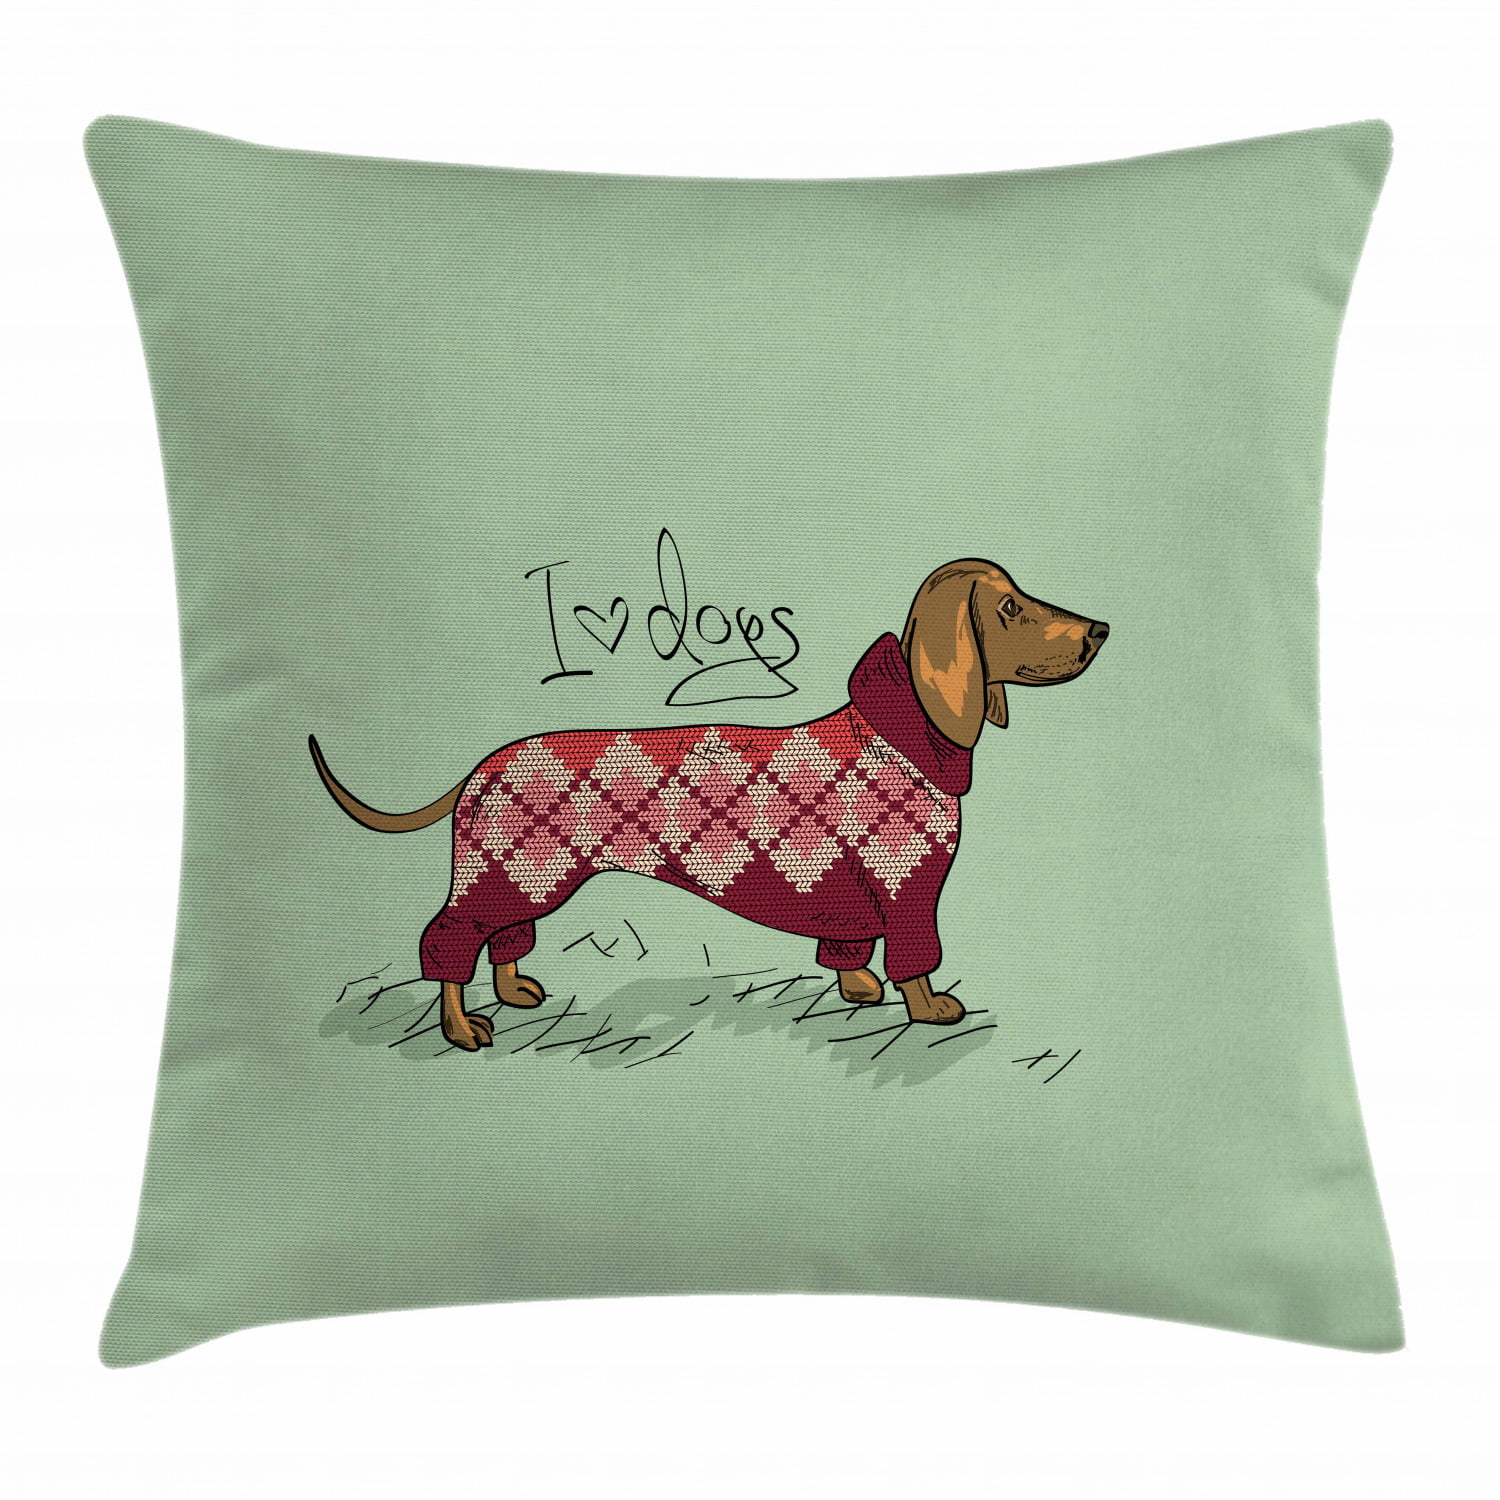 Dachshund Throw Pillow Cushion Cover, Cute Dog in Knitted Sweater Design  Detailed Colorful Cartoon Style Animal Pattern, Decorative Square Accent  Pillow Case, 24 X 24 Inches, Multicolor, by Ambesonne 